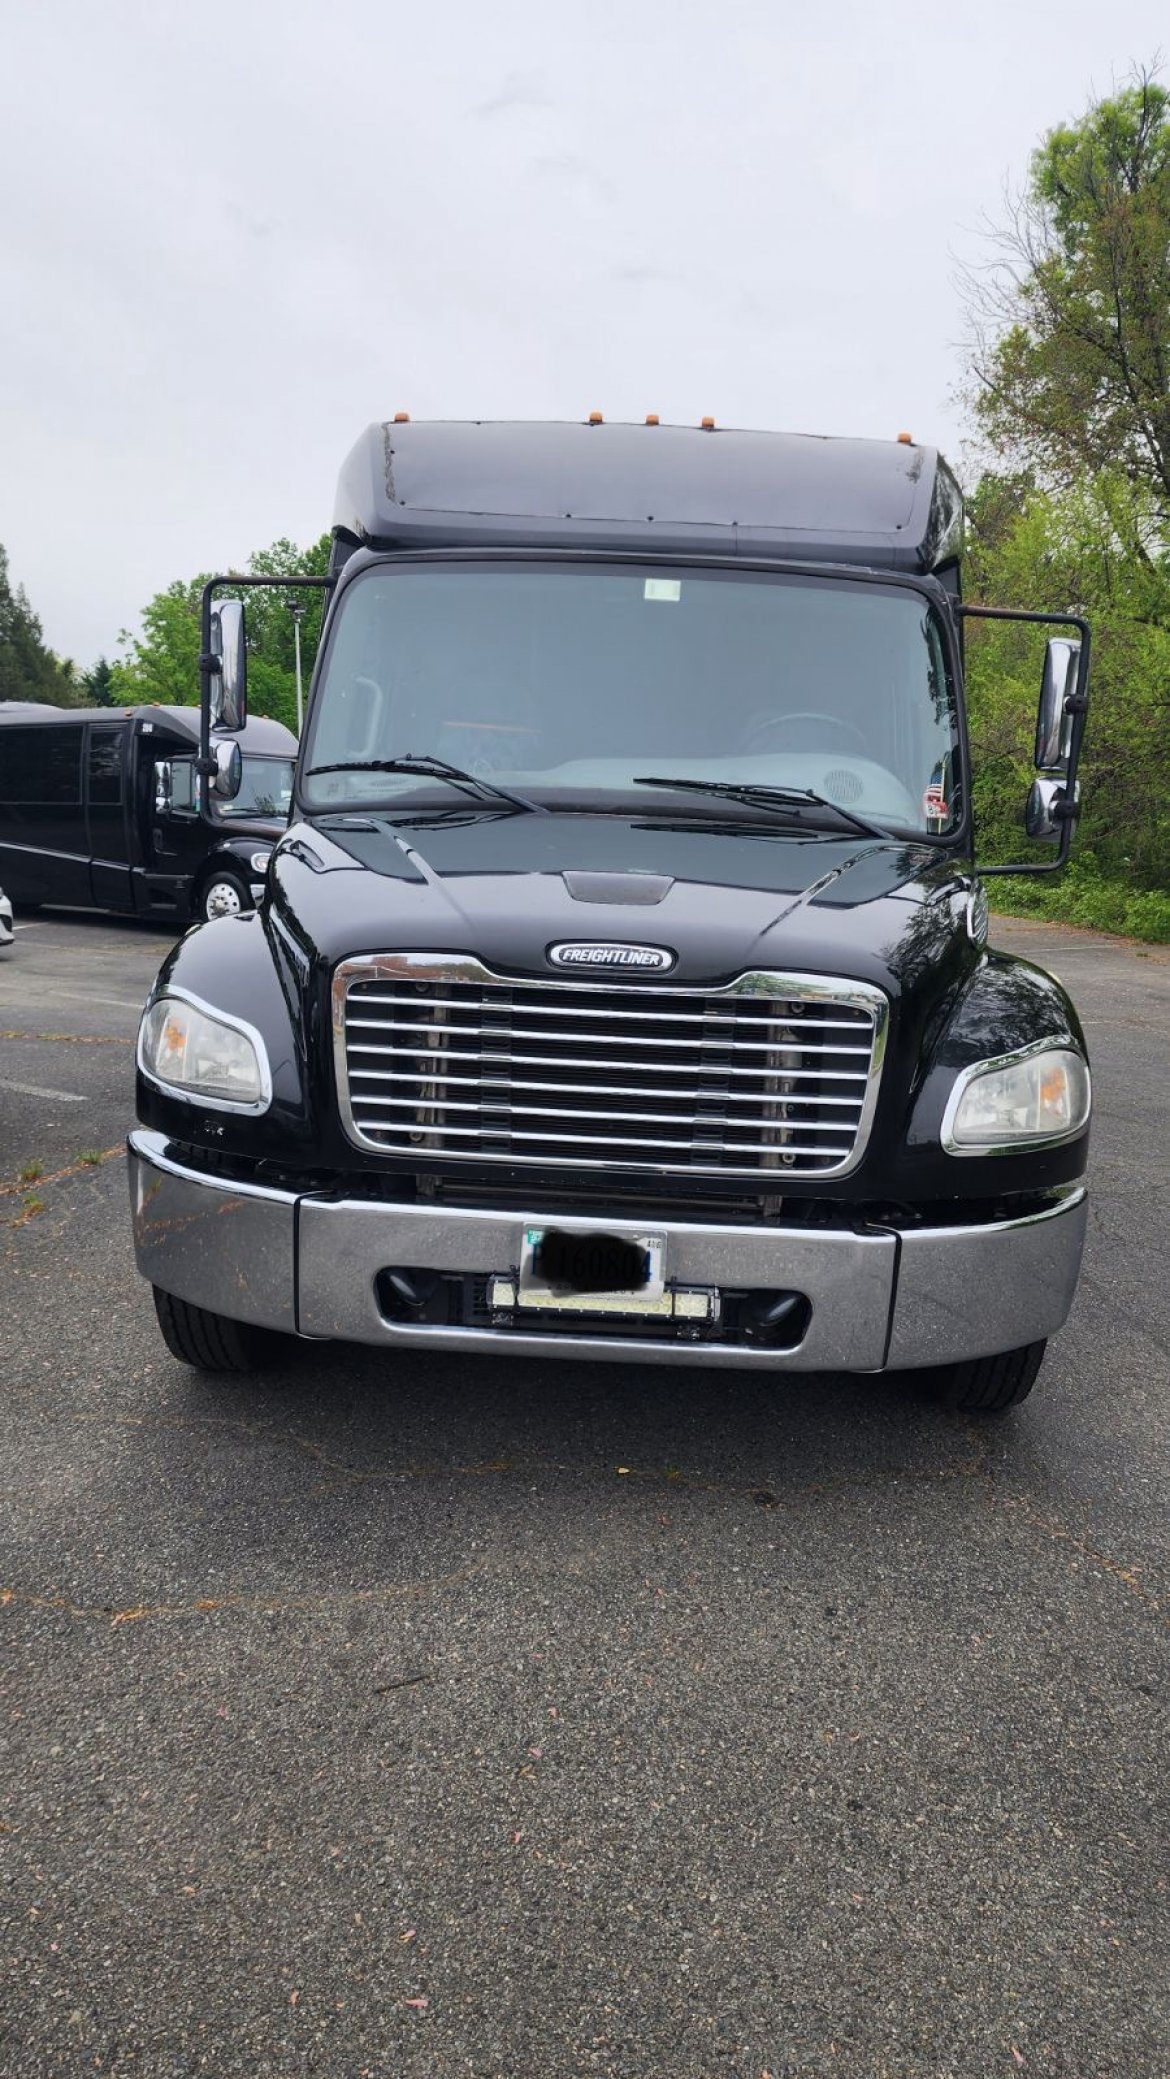 Executive Shuttle for sale: 2014 Freightliner M2 Executive Shuttle 40&quot; by Grech